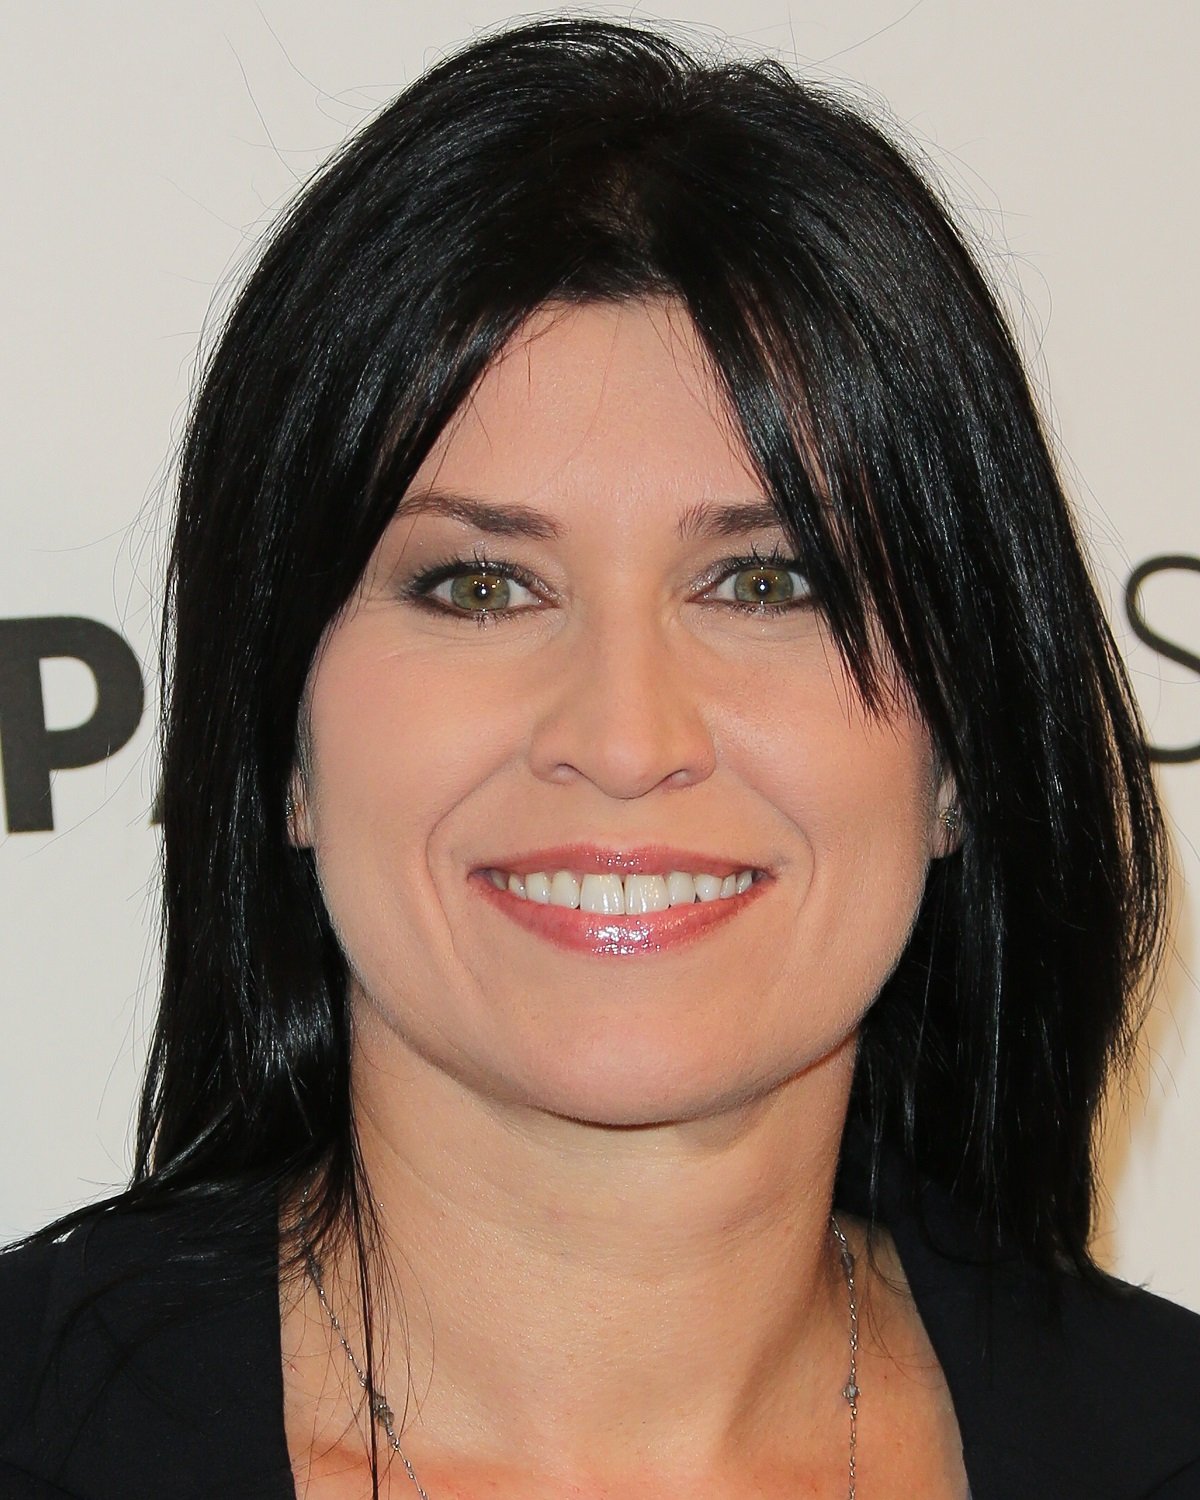 Nancy McKeon attends the 2014 PaleyFest Fall TV previews